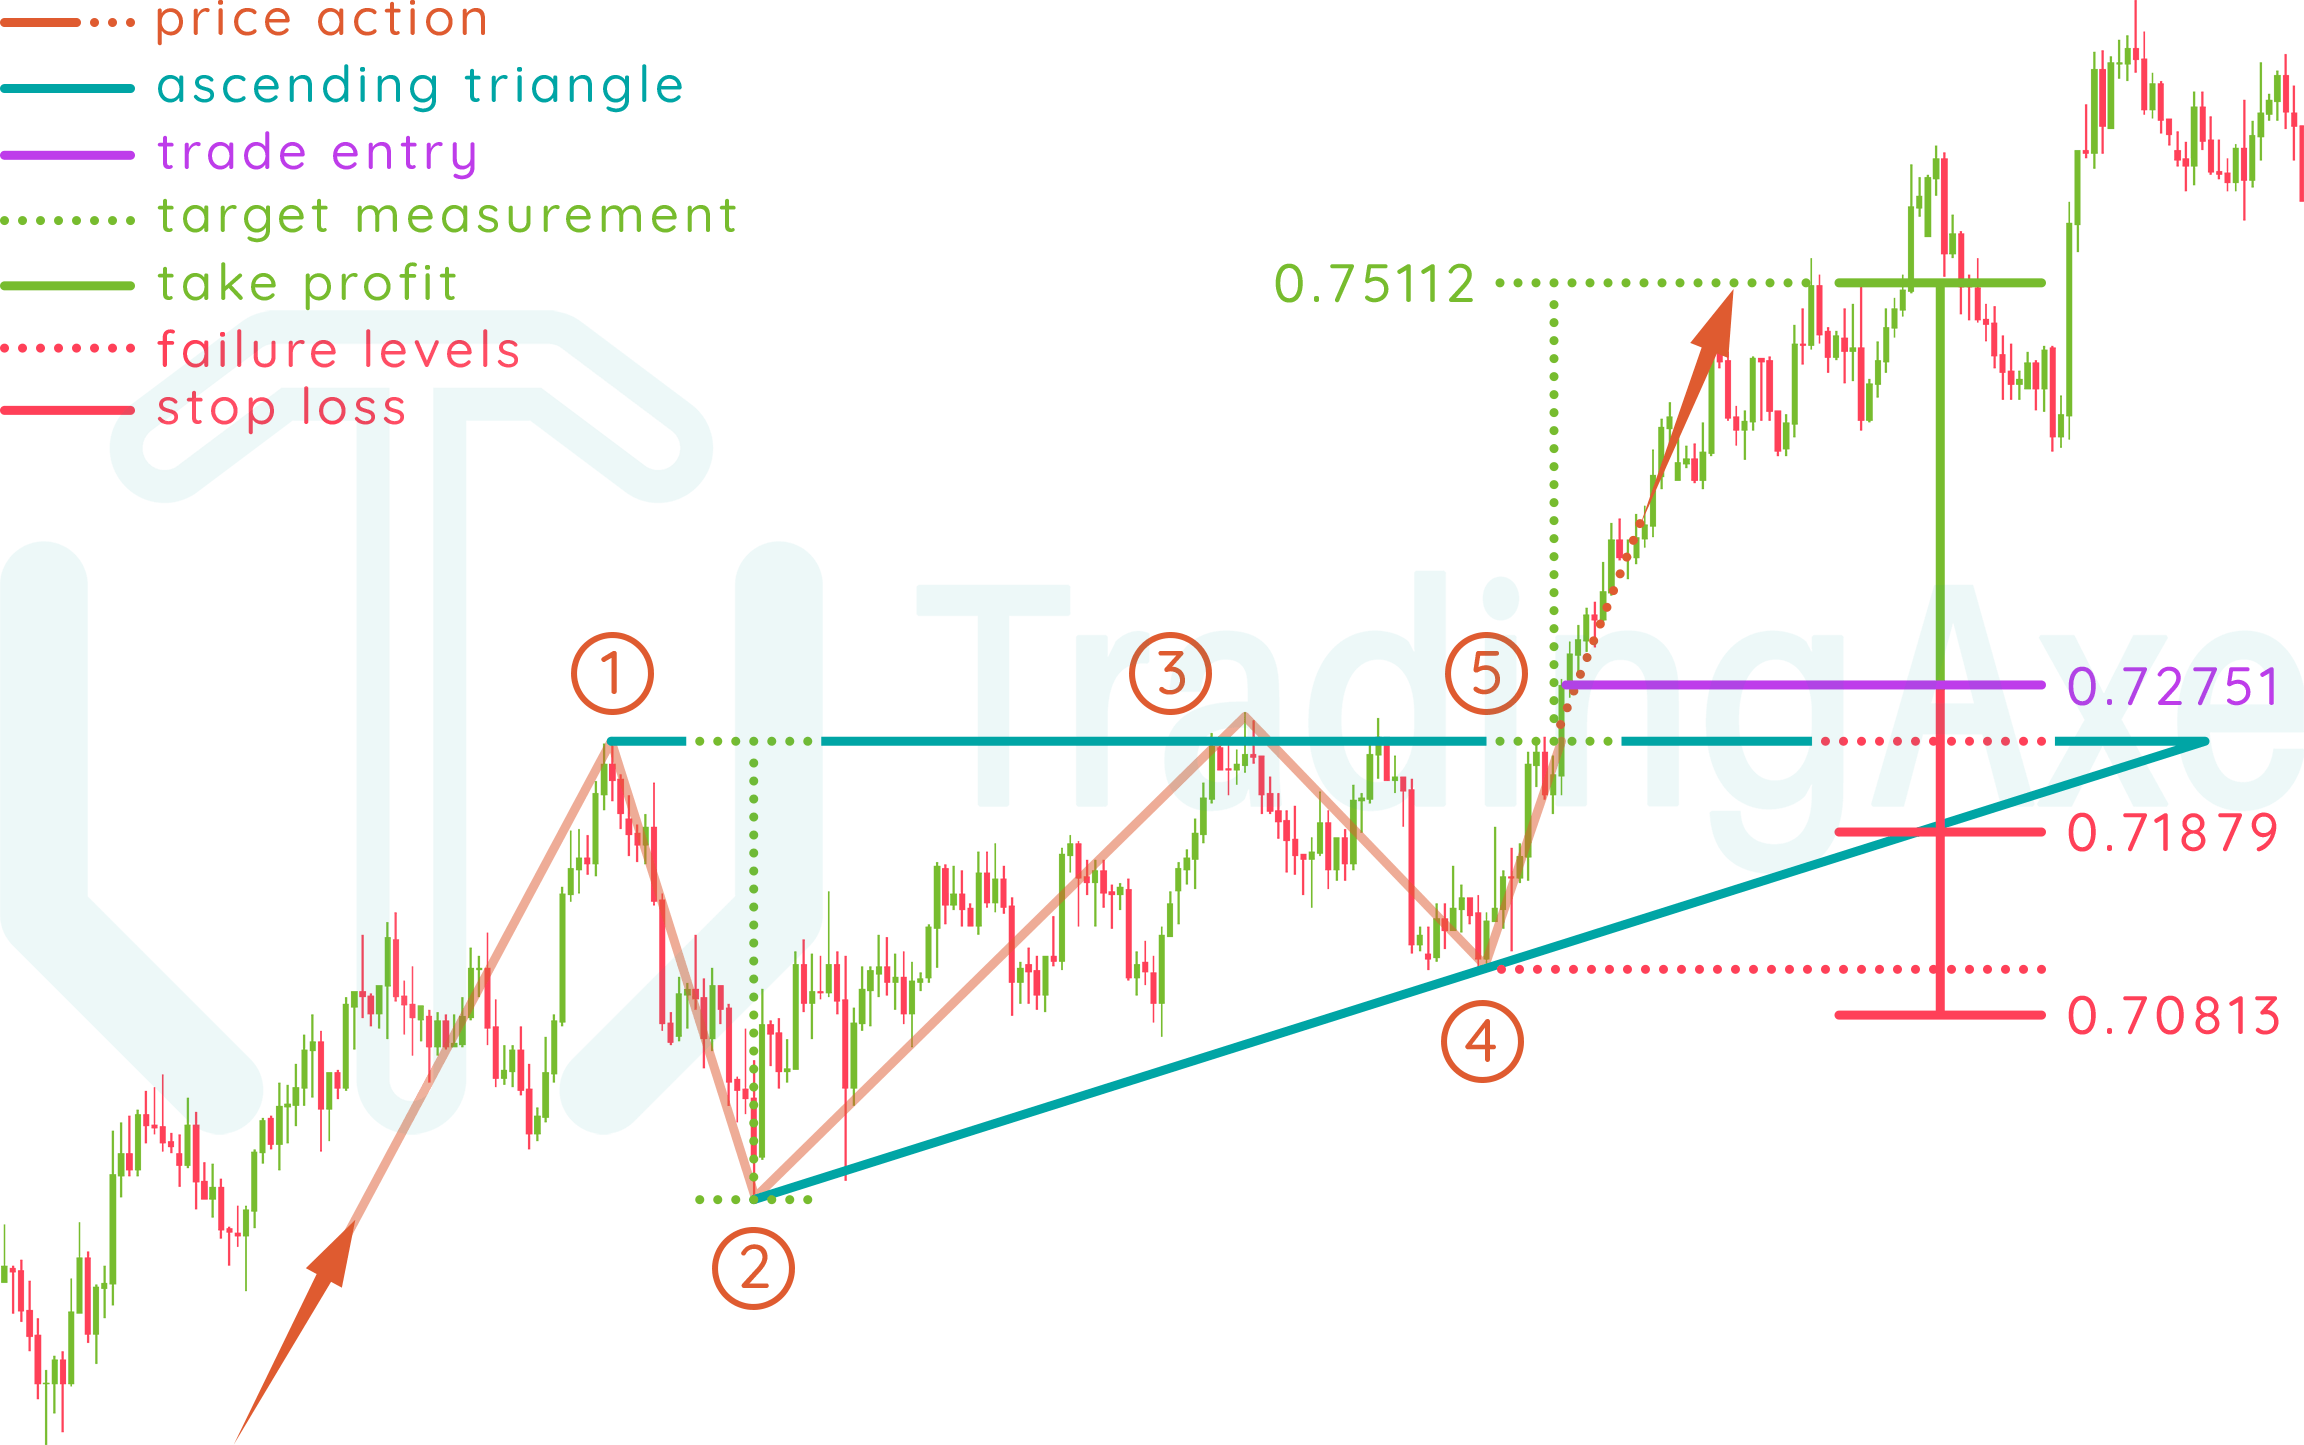 Ascending triangle real trading example